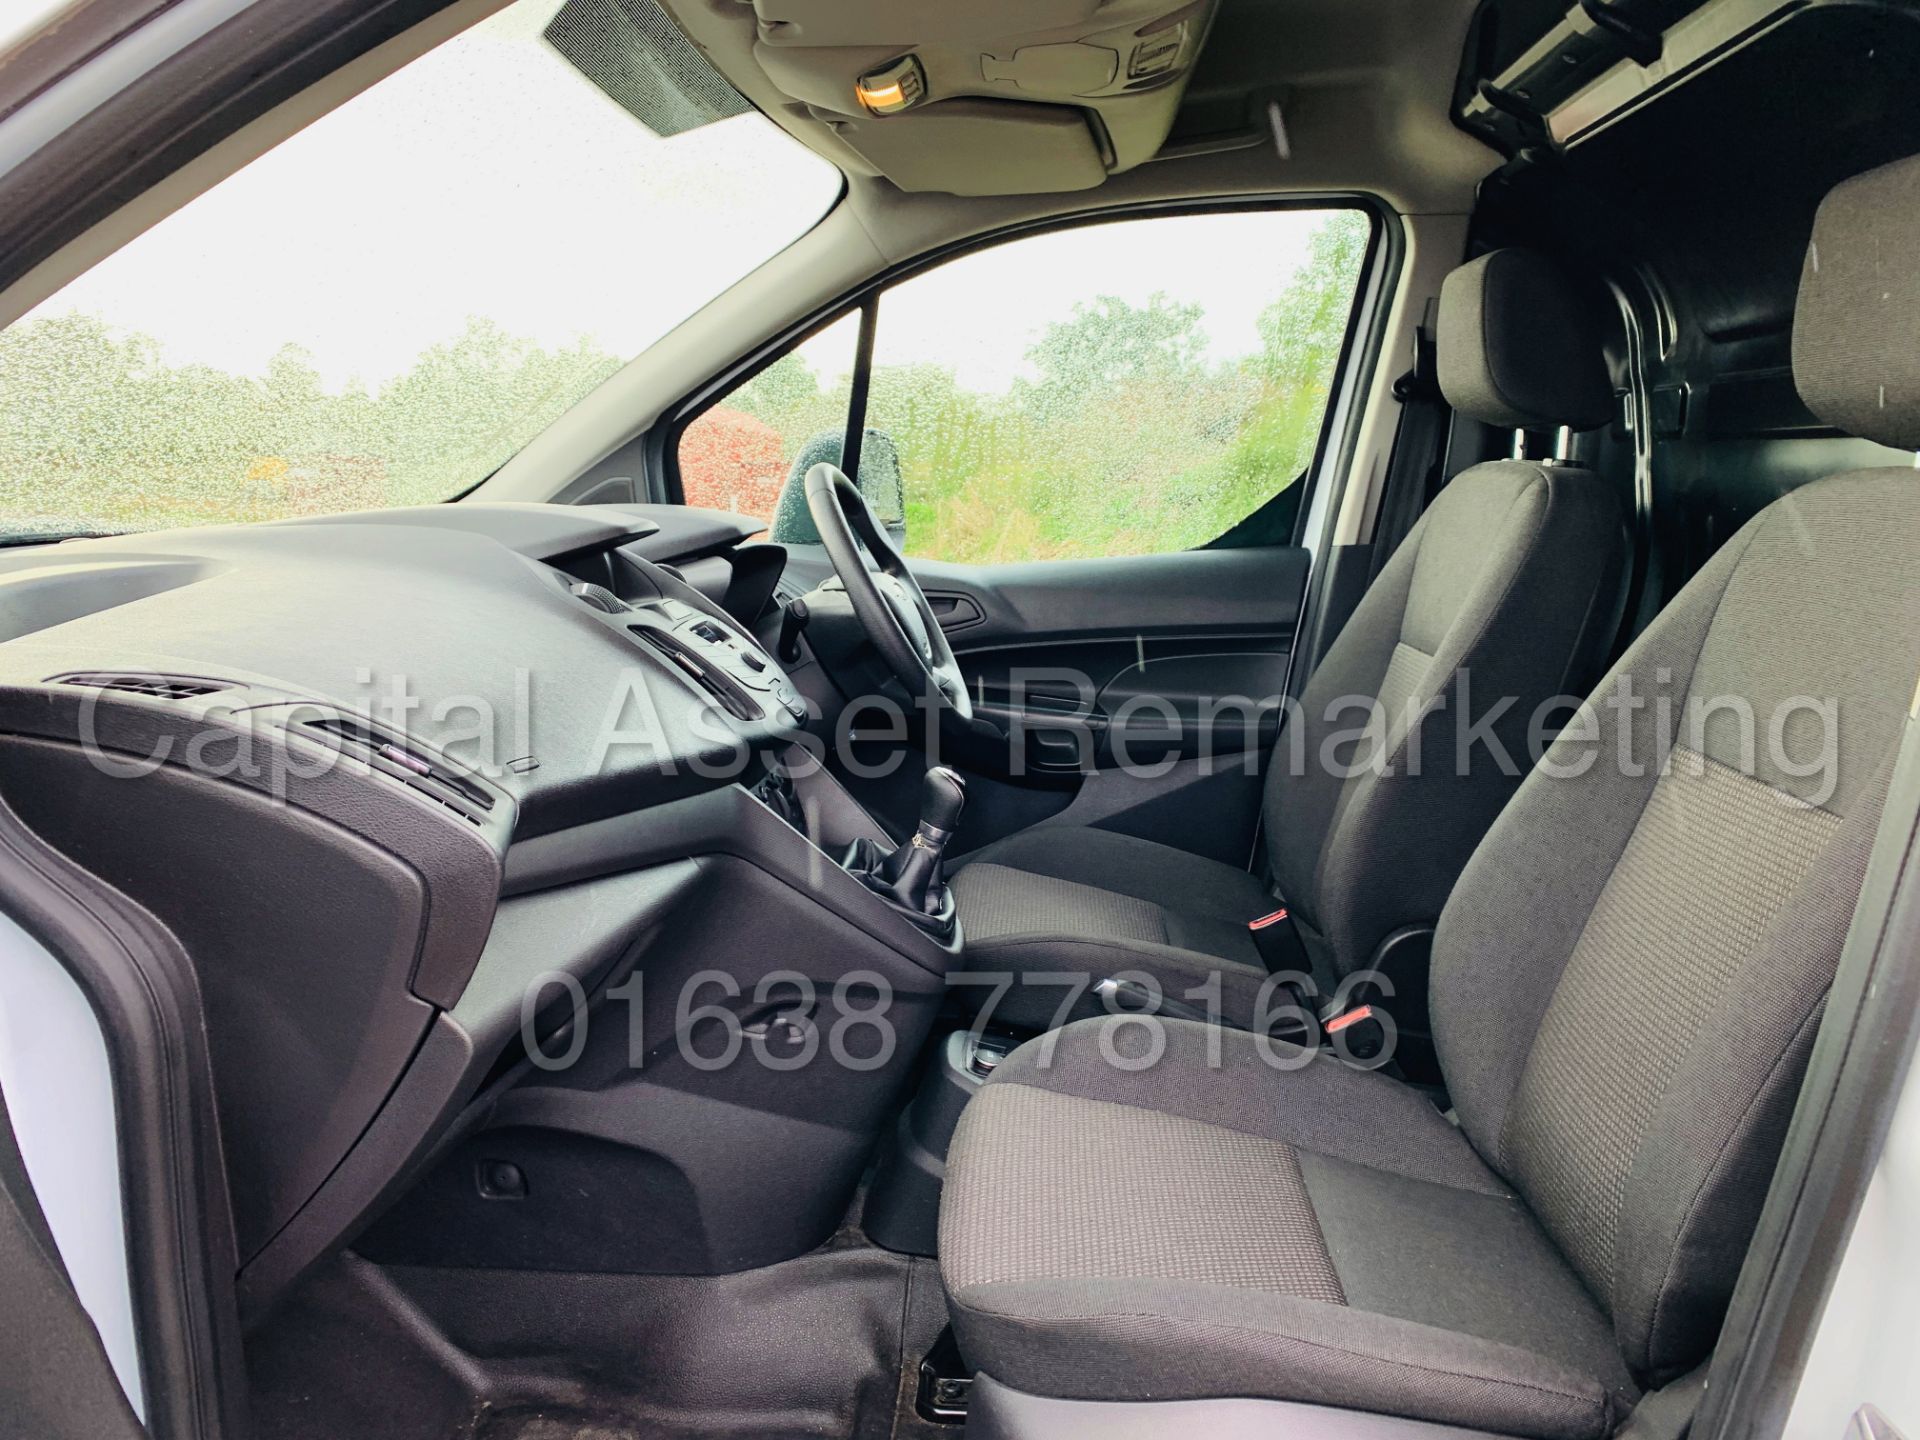 FORD TRANSIT CONNECT 75 T200 *SWB - PANEL VAN* (2018 MODEL) '1.5 TDCI - EURO 6 COMPLIANT' (1 OWNER) - Image 19 of 36